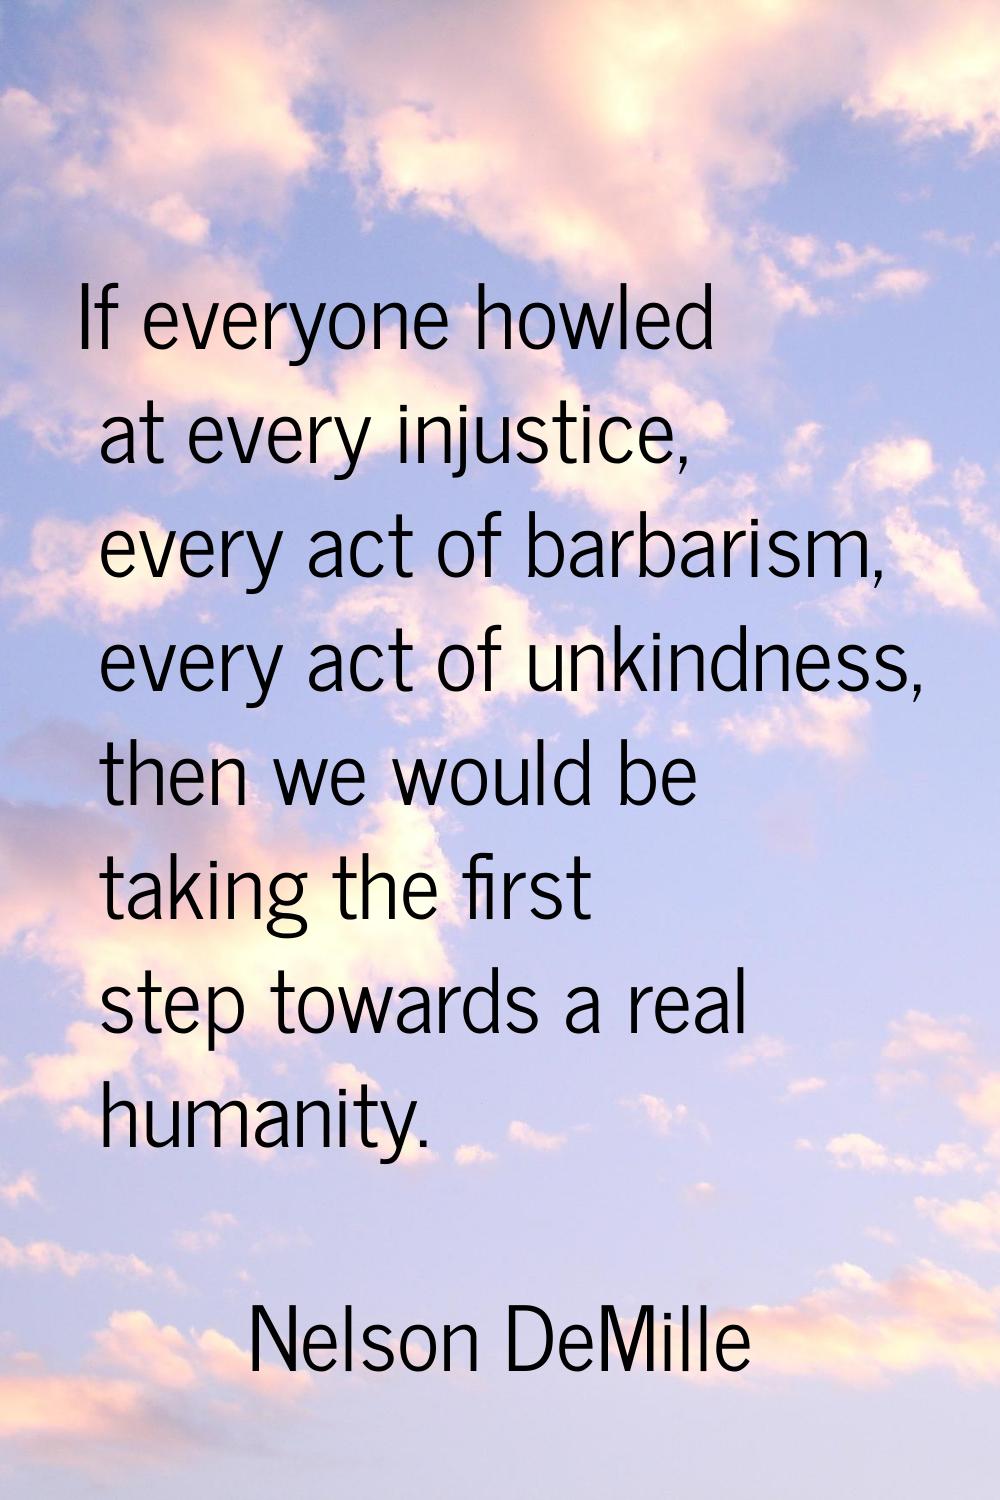 If everyone howled at every injustice, every act of barbarism, every act of unkindness, then we wou